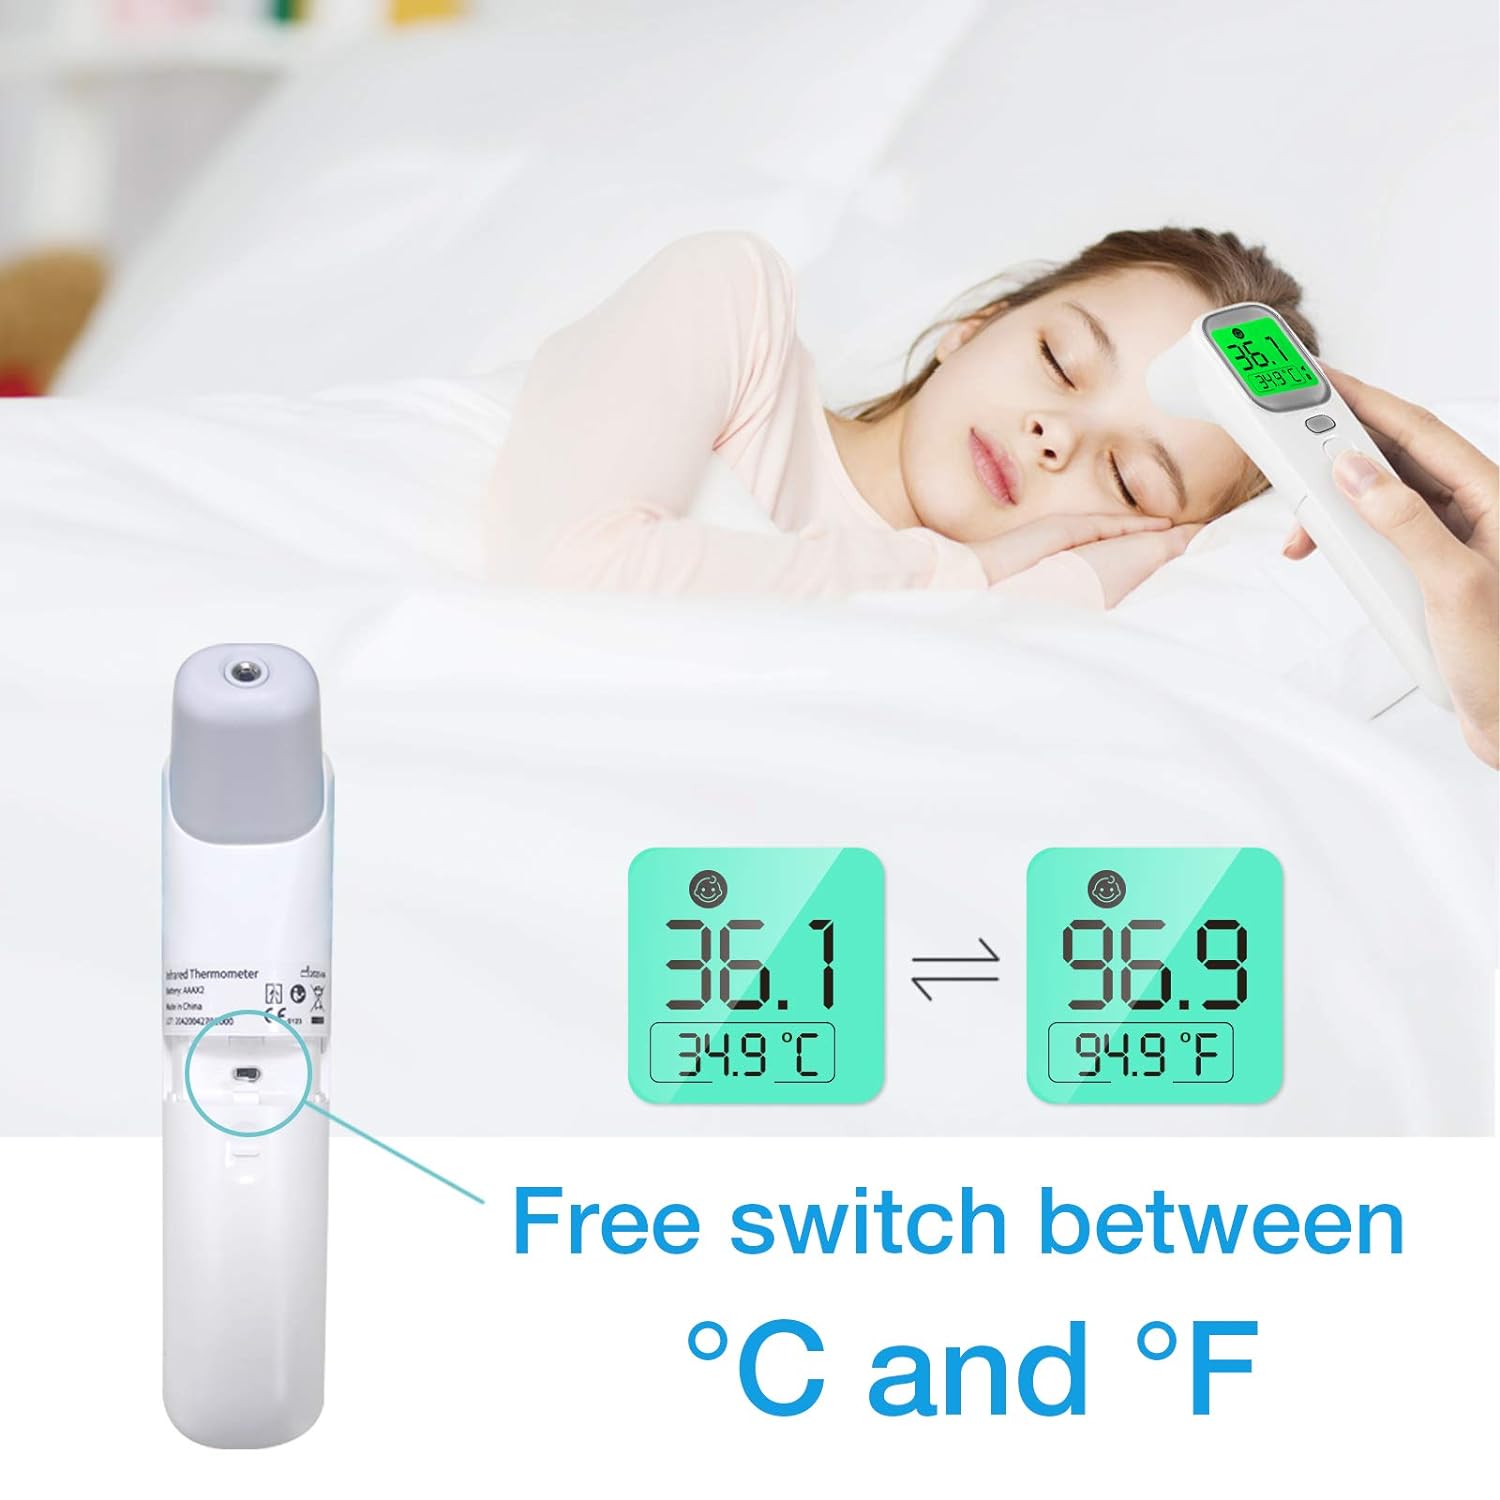 Wellue Touchless Baby Thermometer, Infrared Forehead and Ear Thermometer, Medical Temporal Thermometer for Adults, Kids, Babies, Large LCD Screen, Memory Stroage and Fever Alarm : Baby